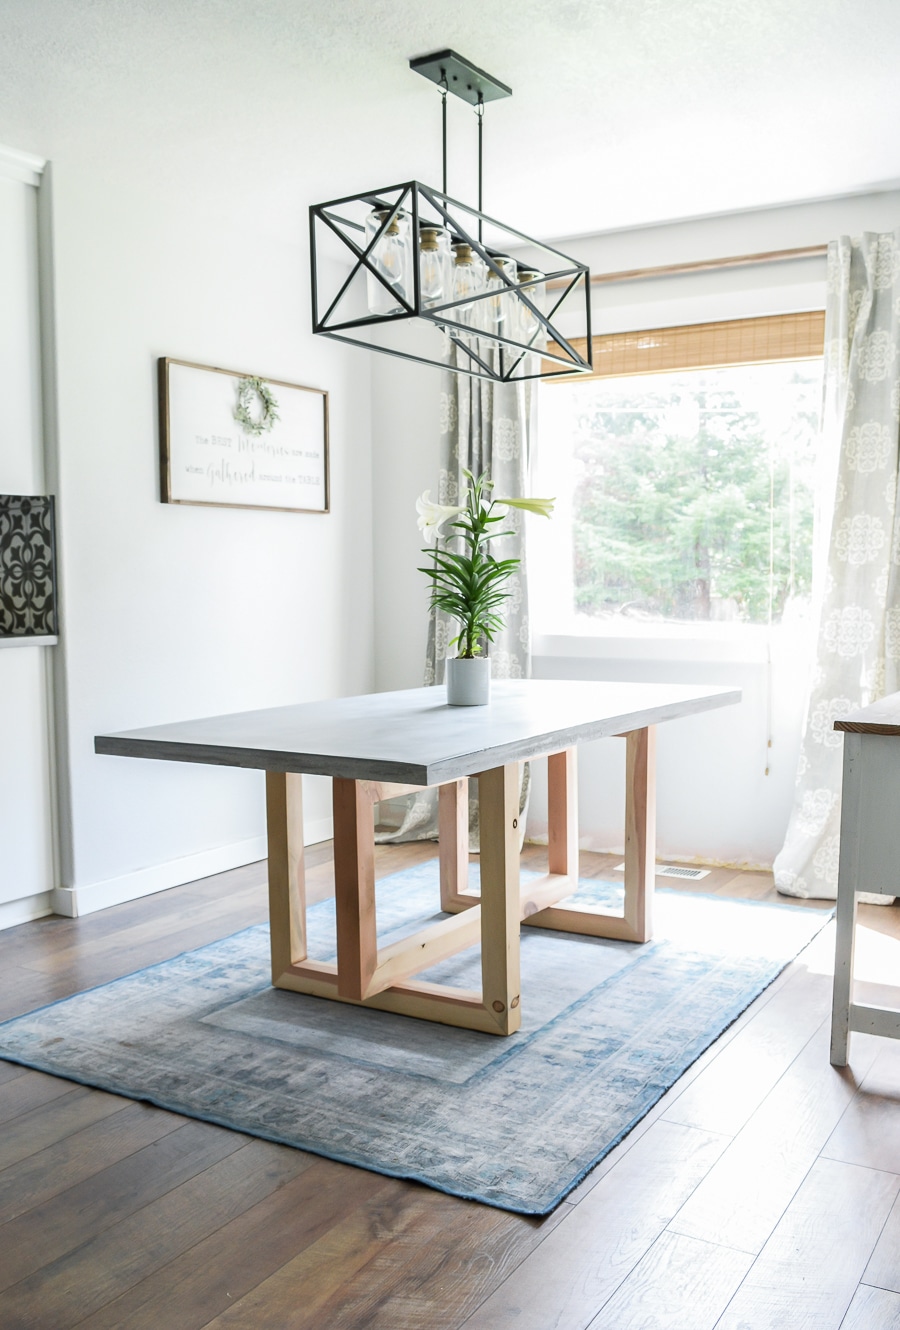 How to make a DIY concrete and wood dining table